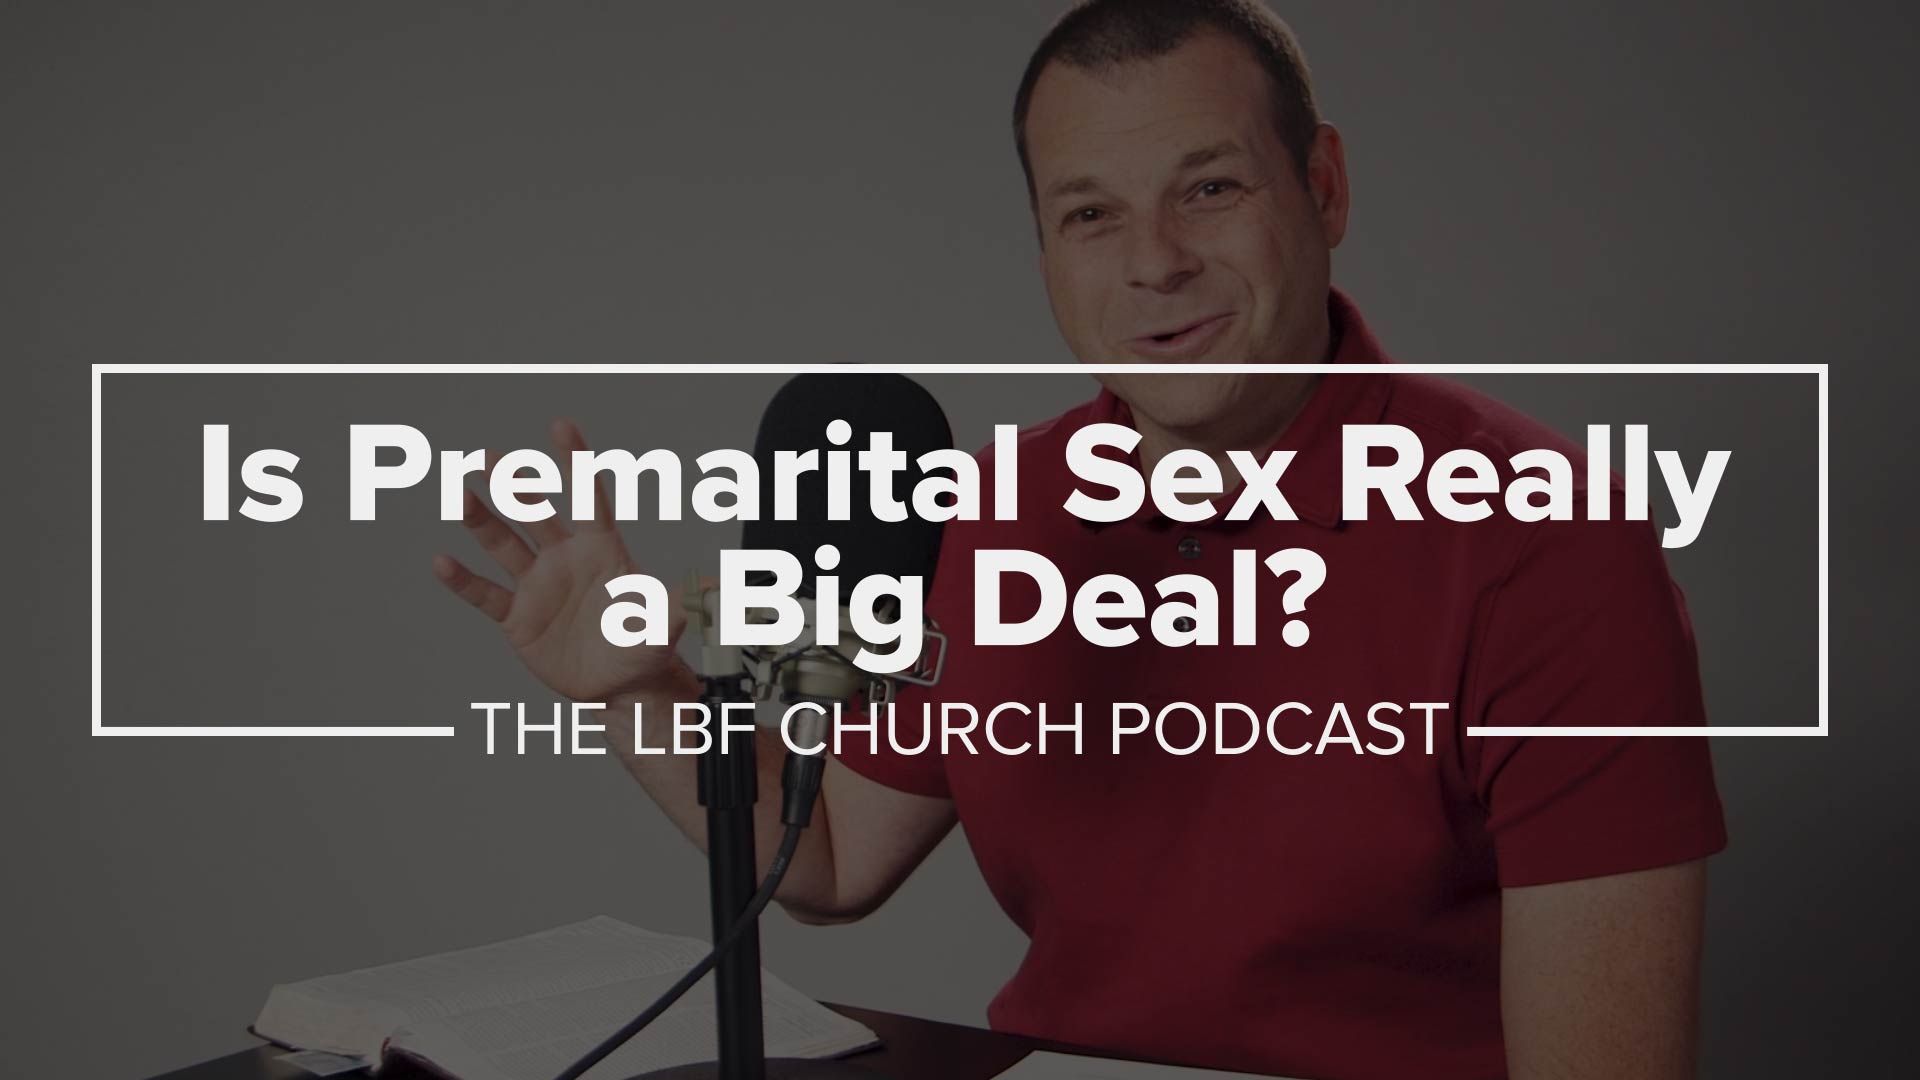 What's wrong with premarital sex?